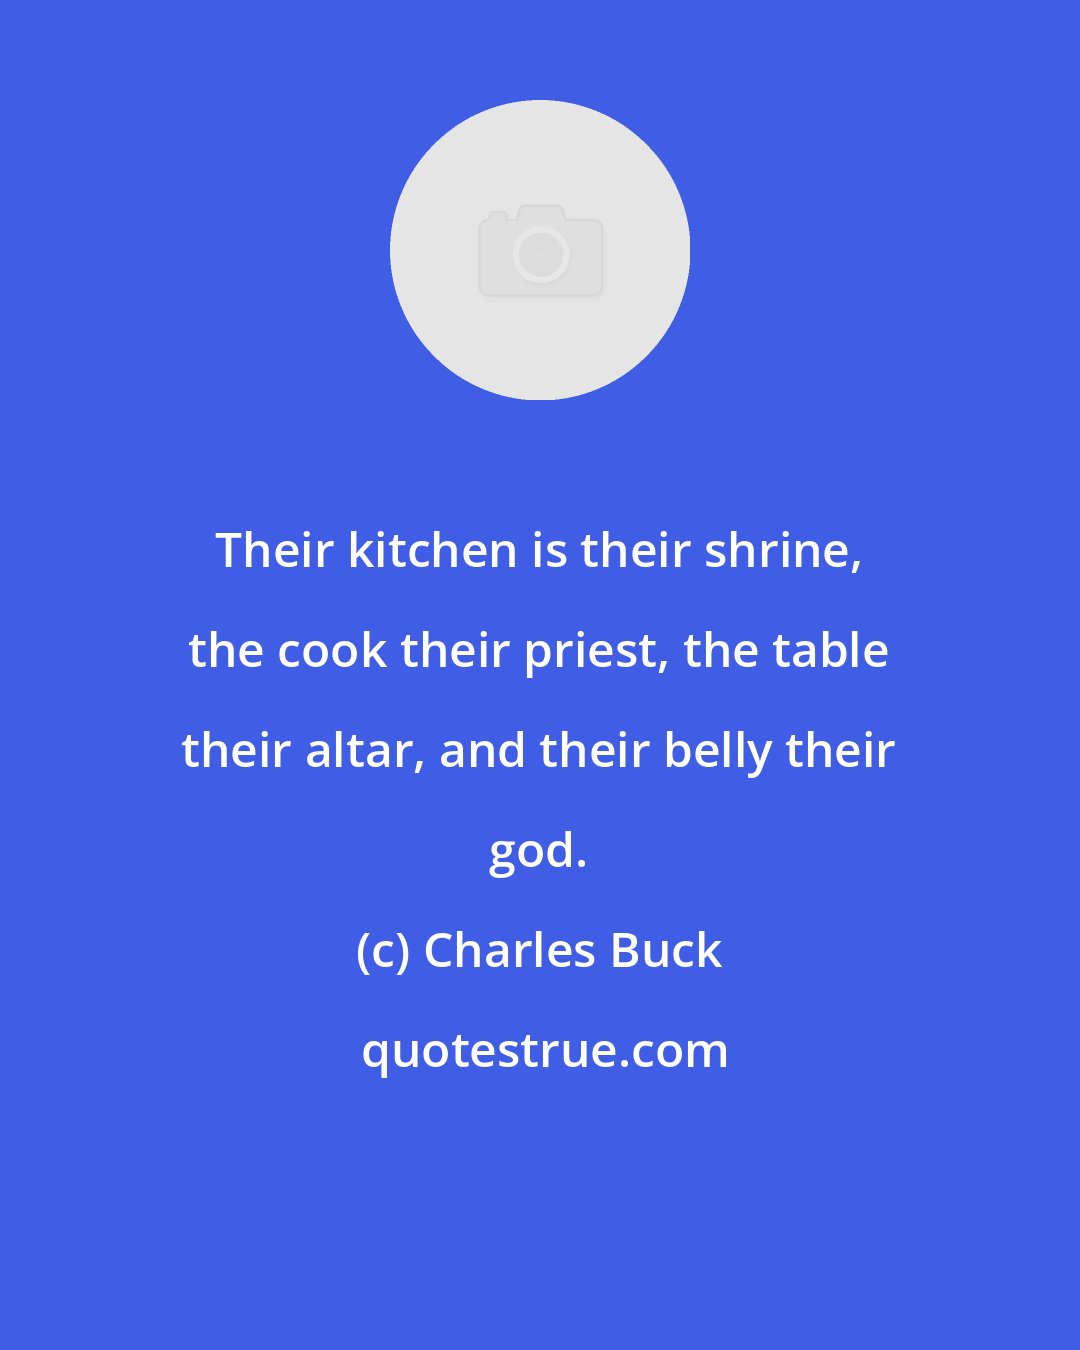 Charles Buck: Their kitchen is their shrine, the cook their priest, the table their altar, and their belly their god.